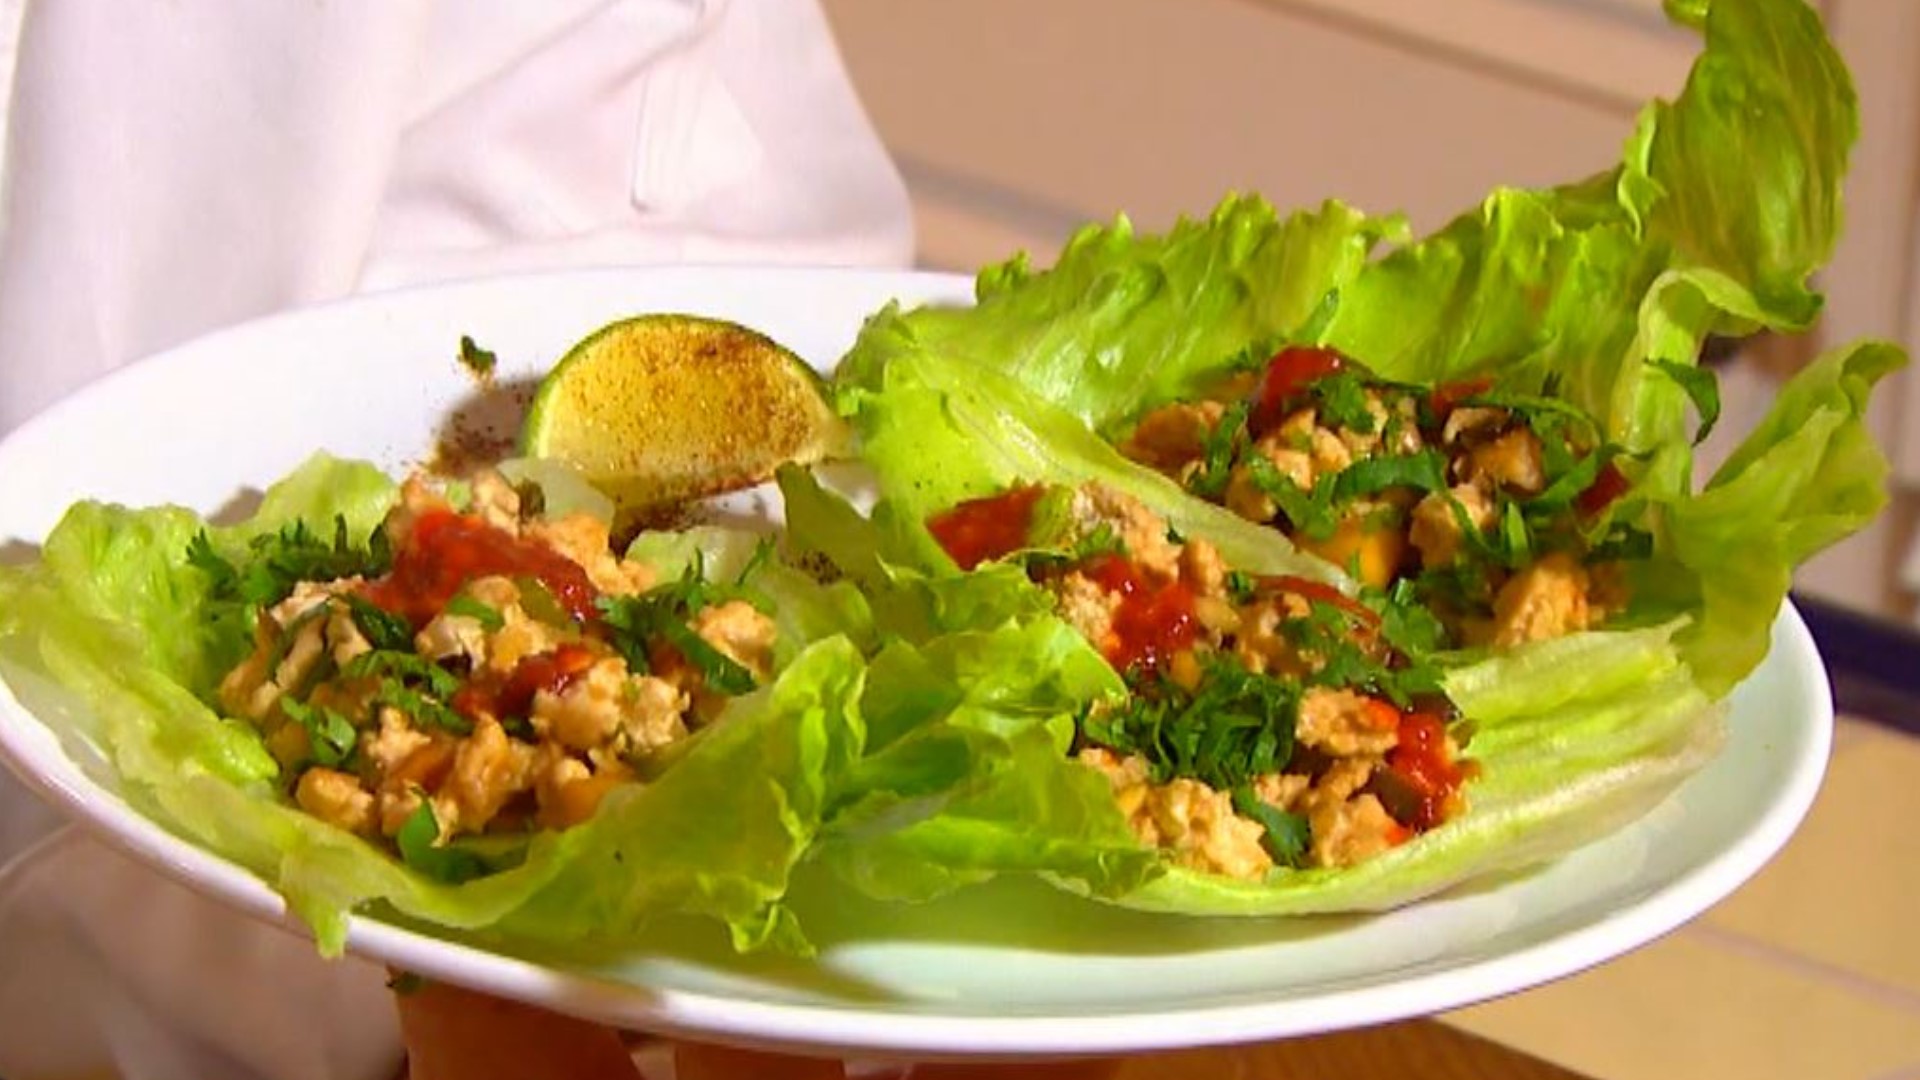 Check out Shawn Style's lettuce wrap recipe!